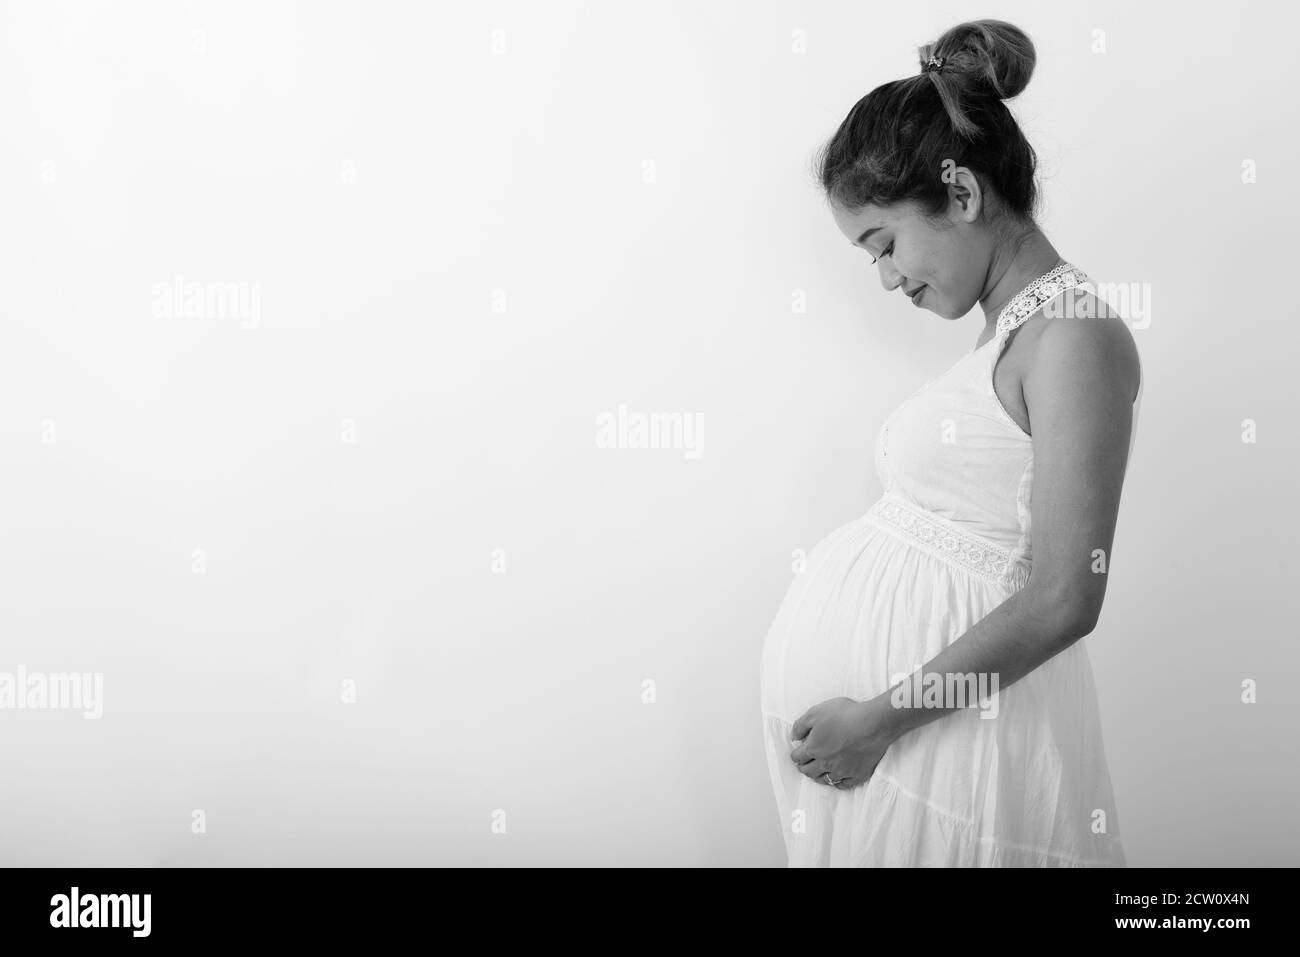 Profile view of young Asian pregnant woman holding while looking at her stomach against white background Stock Photo